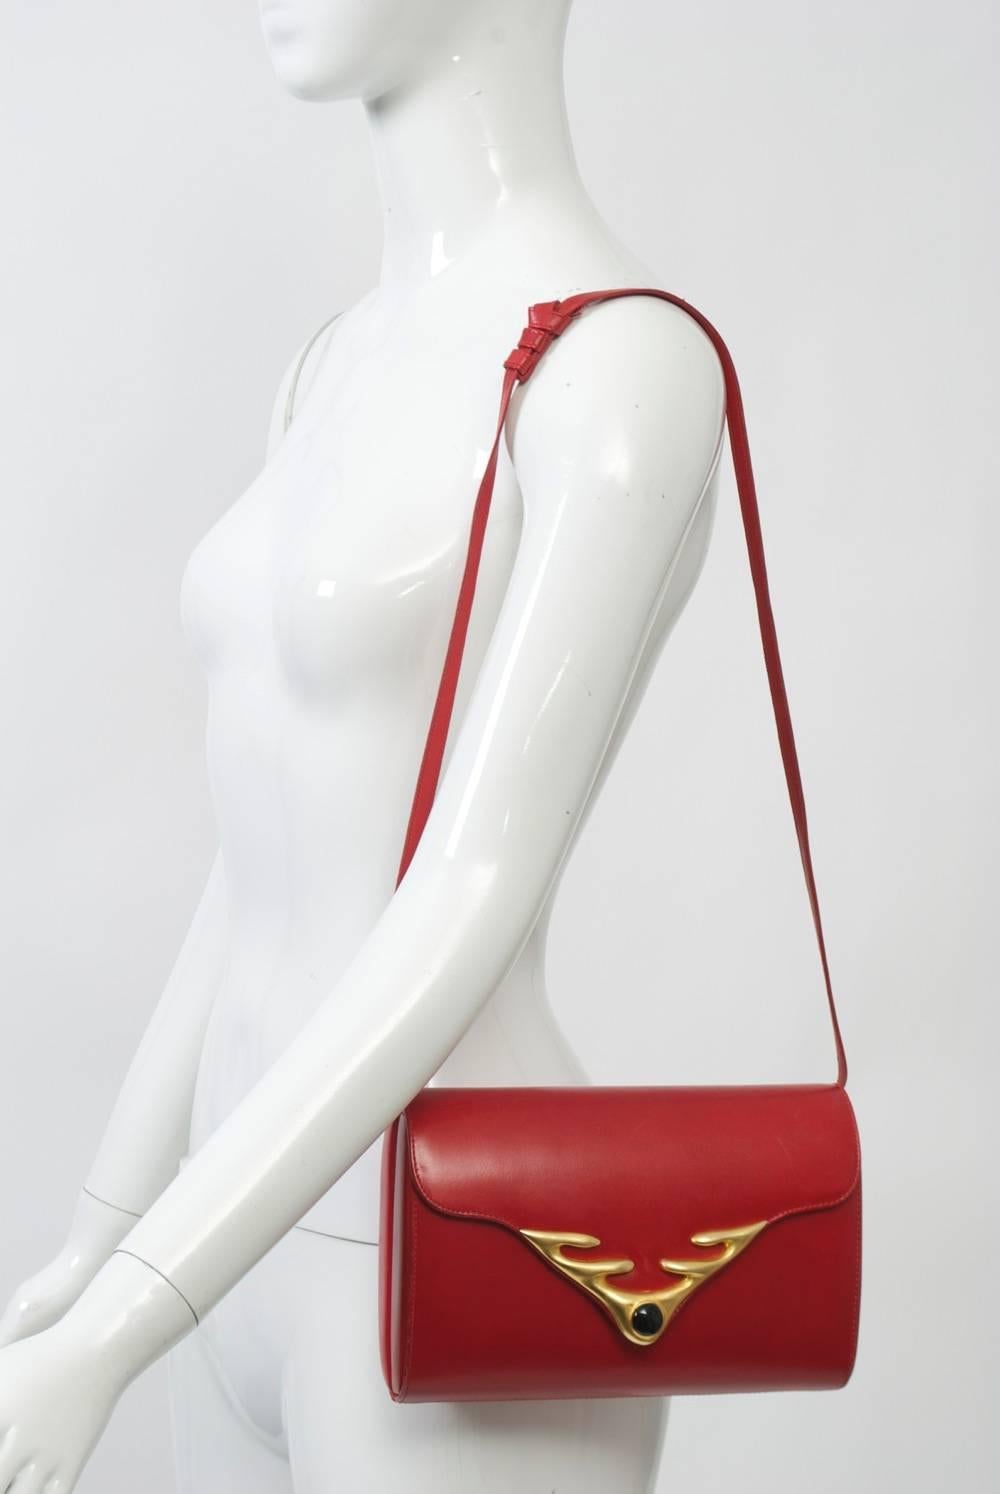 Robert Lee Morris has been a fixture on the modern jewelry scene for over four decades. He also produces accessories, and in this handbag, the dynamism that characterizes his jewelry is evident. Crafted of a smooth red leather, the structured oval